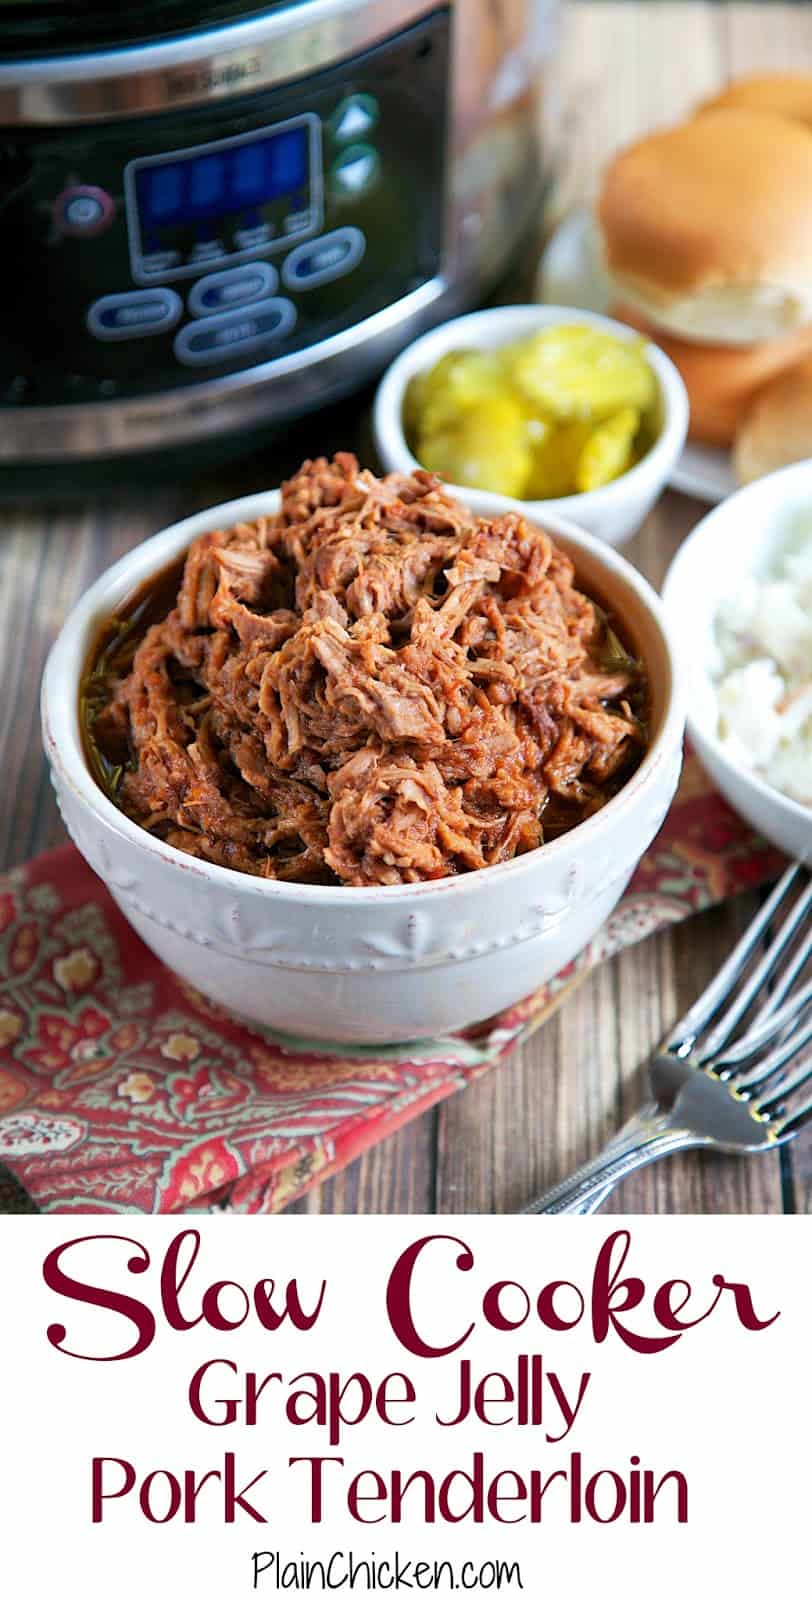 {Slow Cooker} Grape Jelly Pork Tenderloin - only 3 ingredients! Just dump everything in the slow cooker and let it hang out all day. Fix it and forget it! Serve the pork on slider buns with coleslaw and pickles! Great for tailgating!